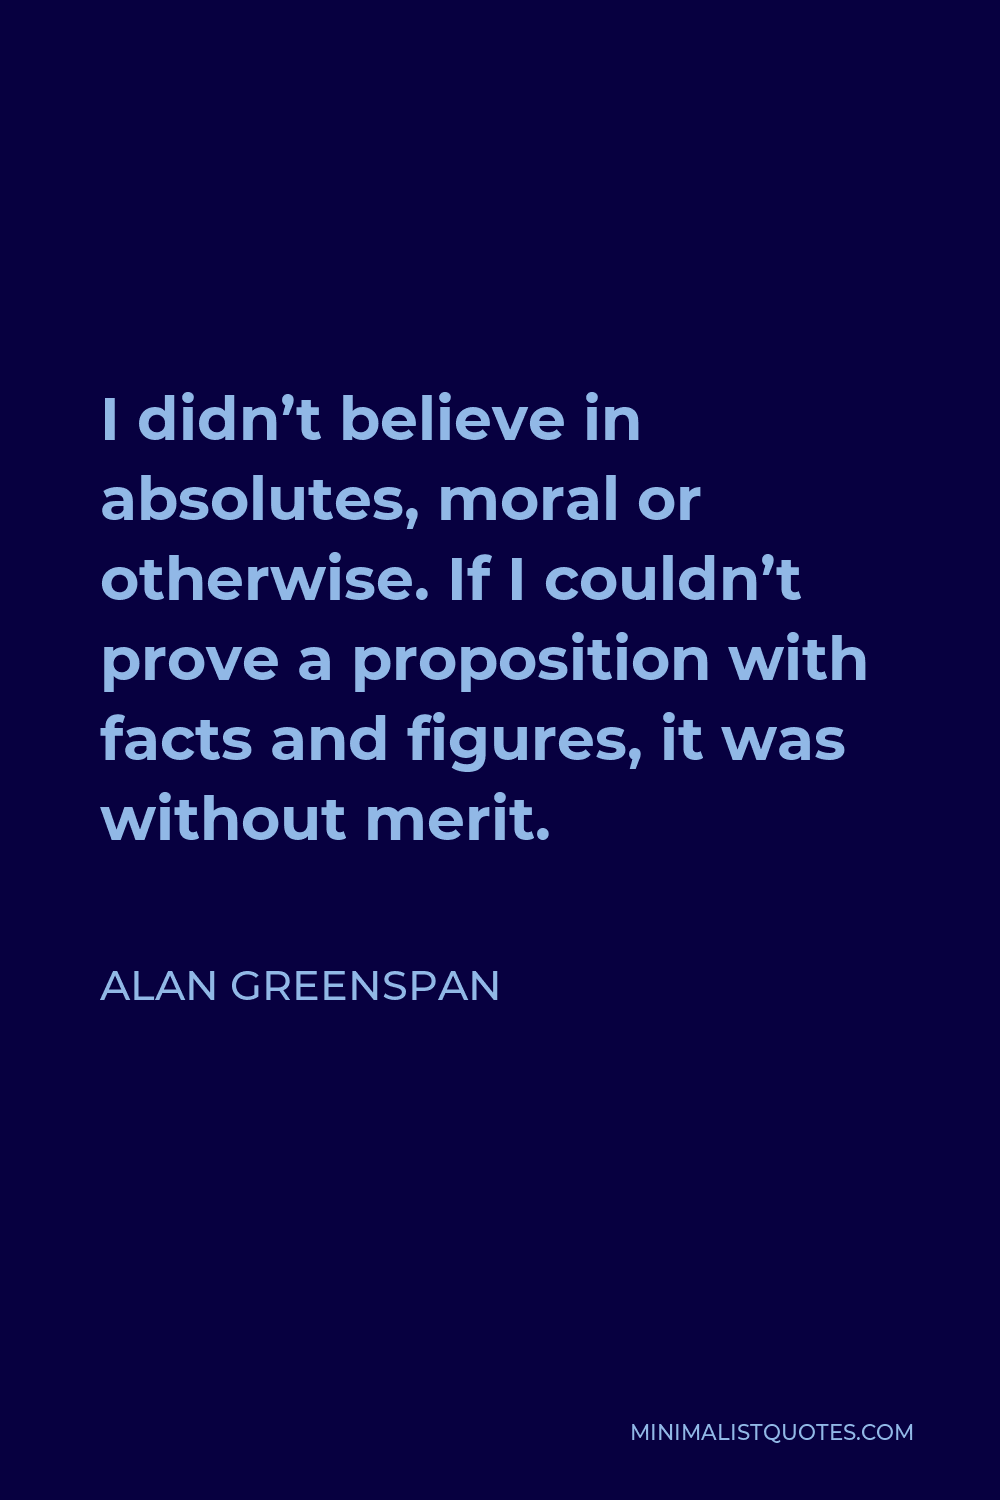 Alan Greenspan Quote - I didn’t believe in absolutes, moral or otherwise. If I couldn’t prove a proposition with facts and figures, it was without merit.